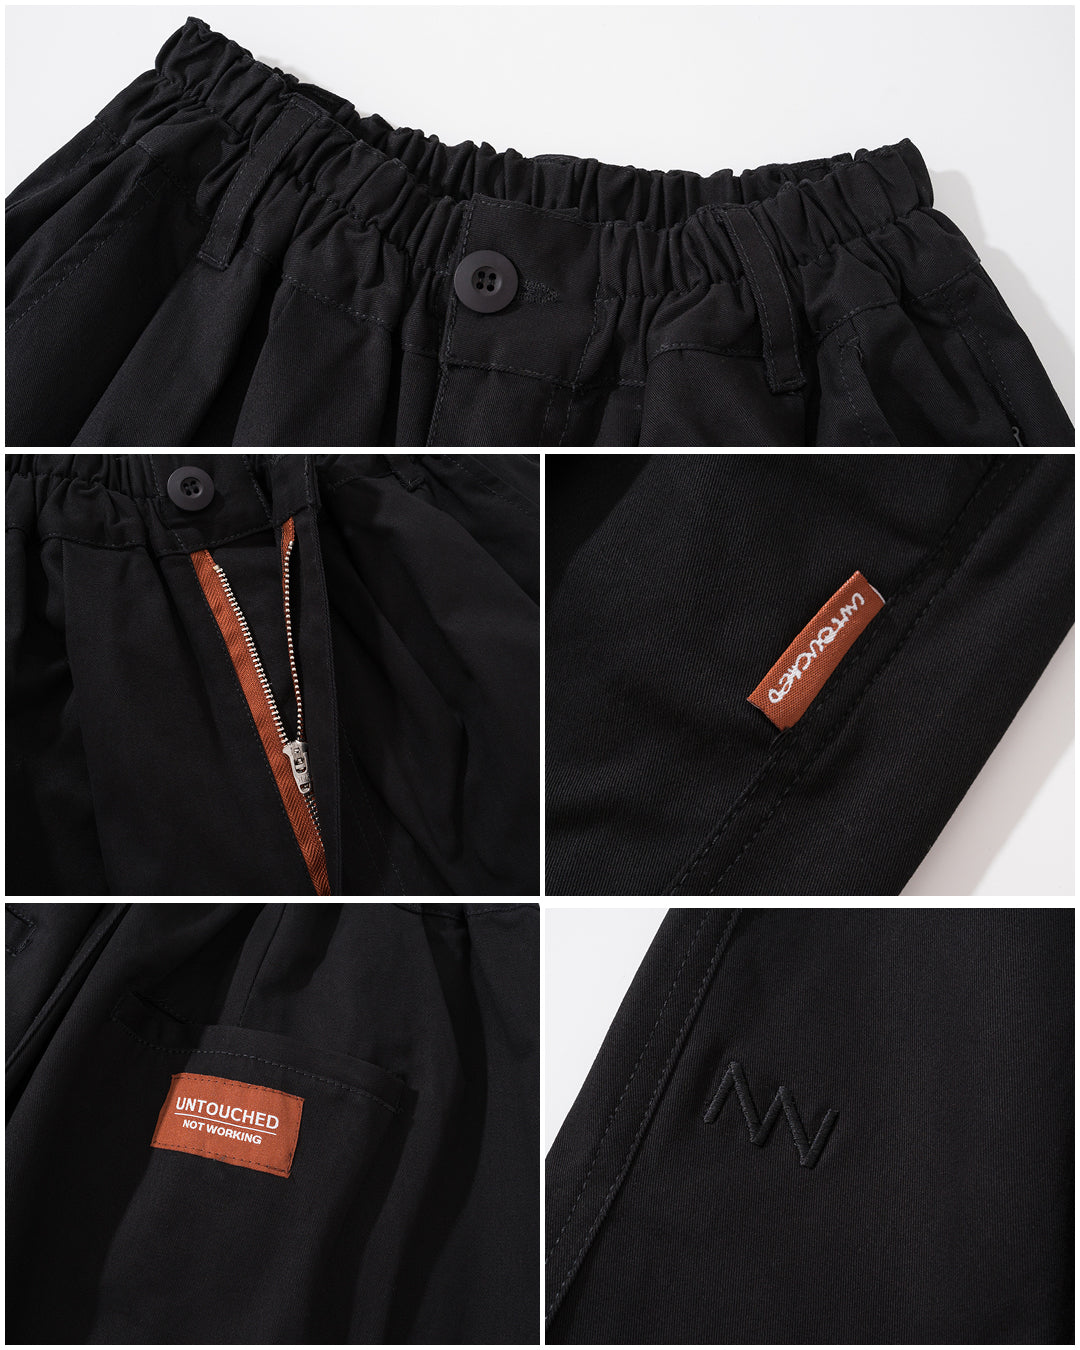 NW110BK | WIDE WORKER SHORTS  | NOT WORKING V